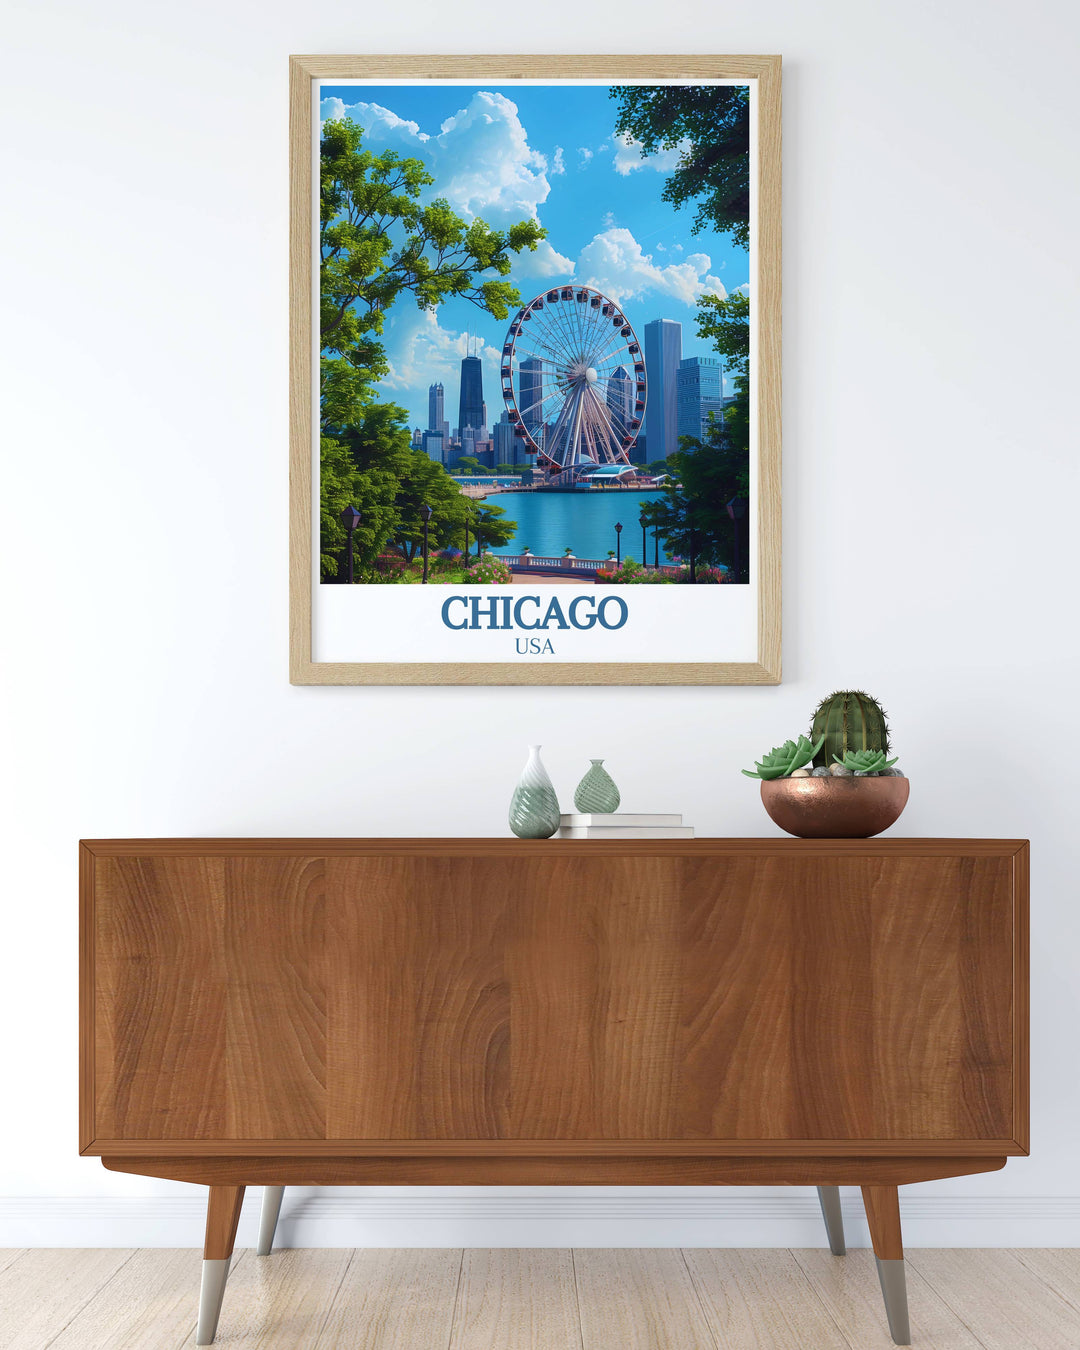 Navy Pier poster showcasing the iconic Ferris wheel and waterfront of Chicagos favorite destination. A beautiful addition to any home decor collection or a unique gift for birthdays anniversaries or holidays like Christmas and Fathers Day.